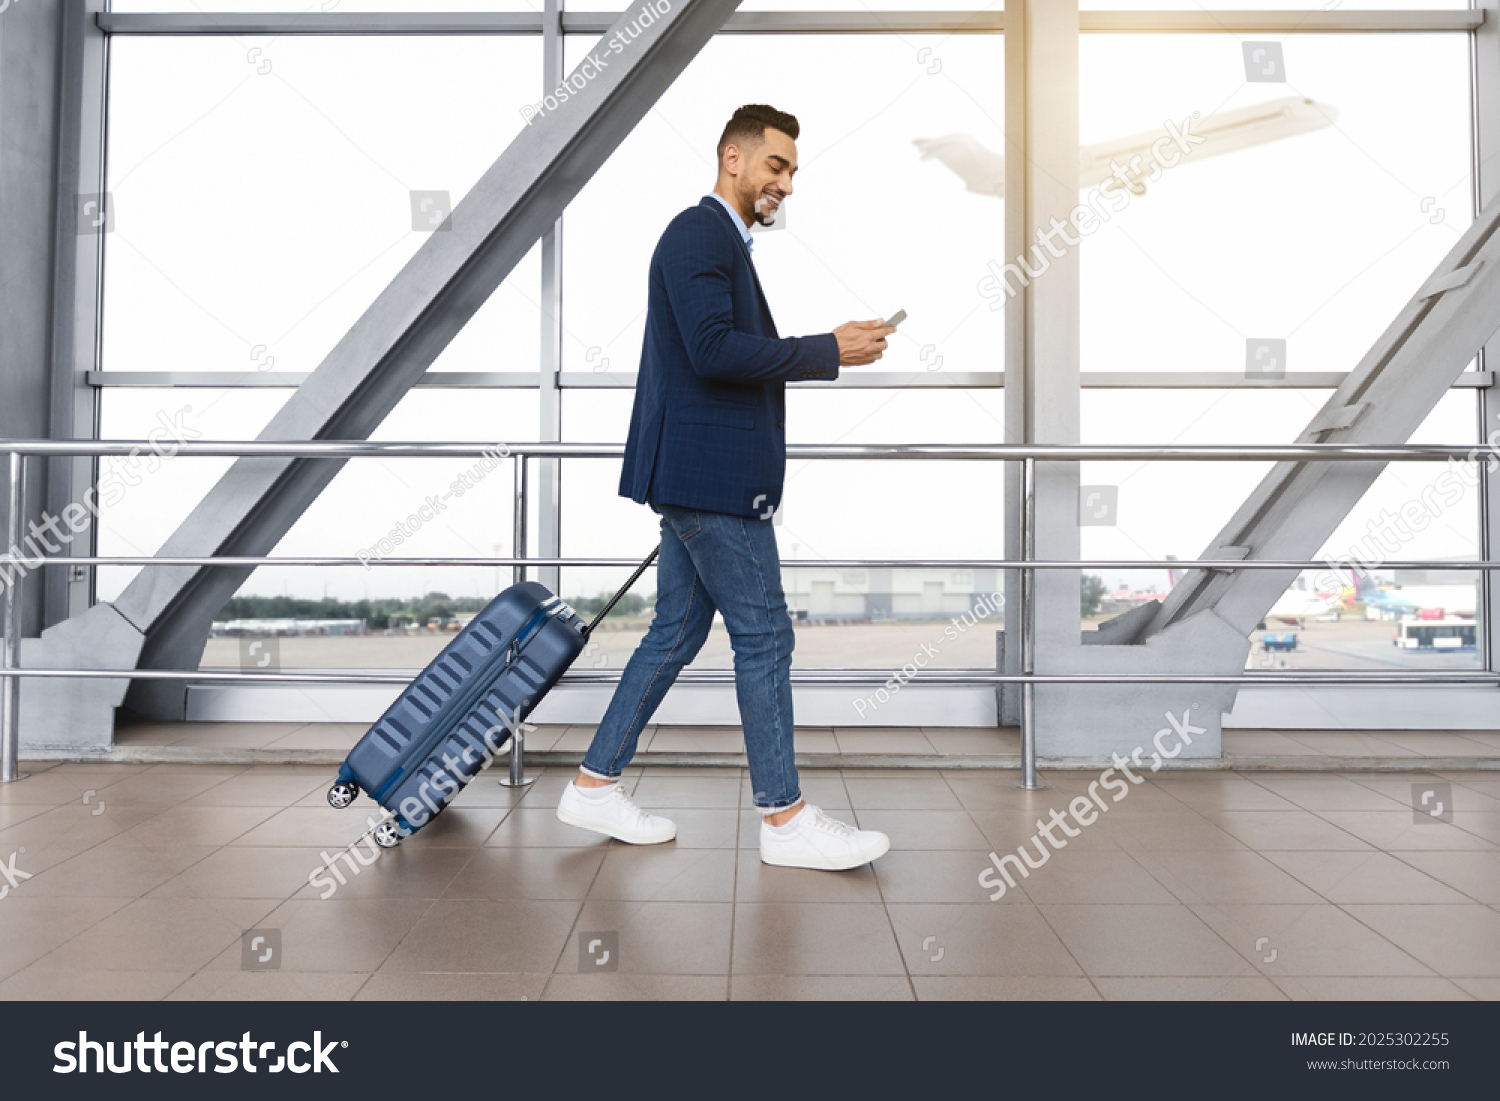 Handsome arab guy using smartphone while walking with suitcase at airport terminal, young middle eastern man browsing mobile internet on cellphone while going to flight boarding, side view #2025302255